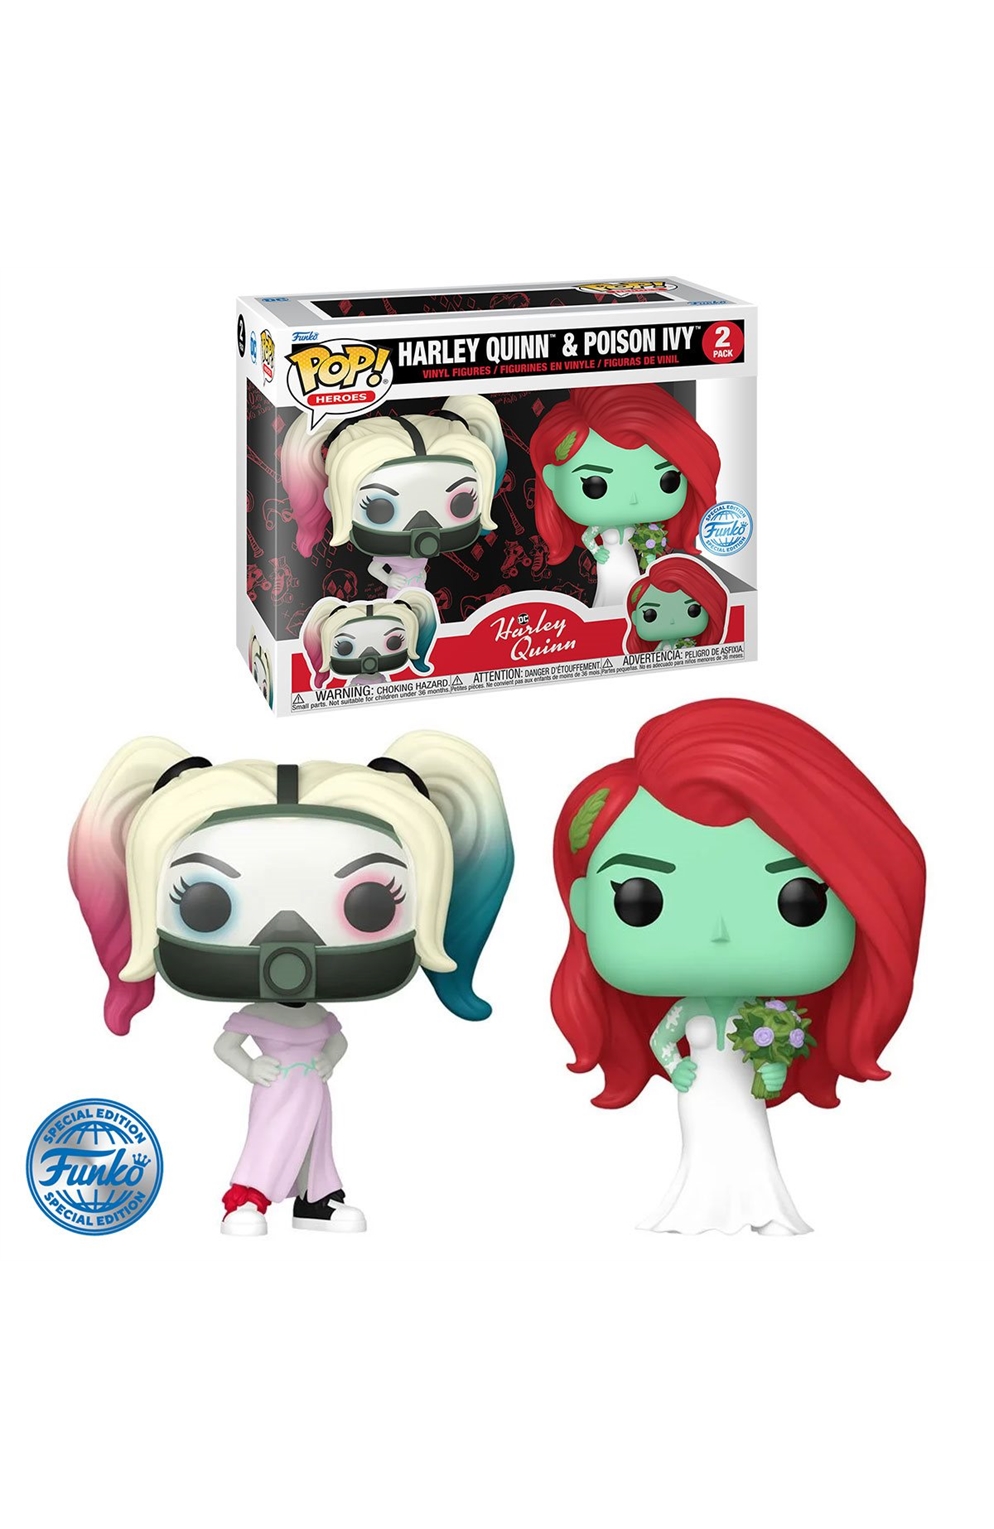 Harley Quinn And Poison Ivy Wedding Funko Pop! Vinyl Figure 2-Pack - Entertainment Earth Exclusive